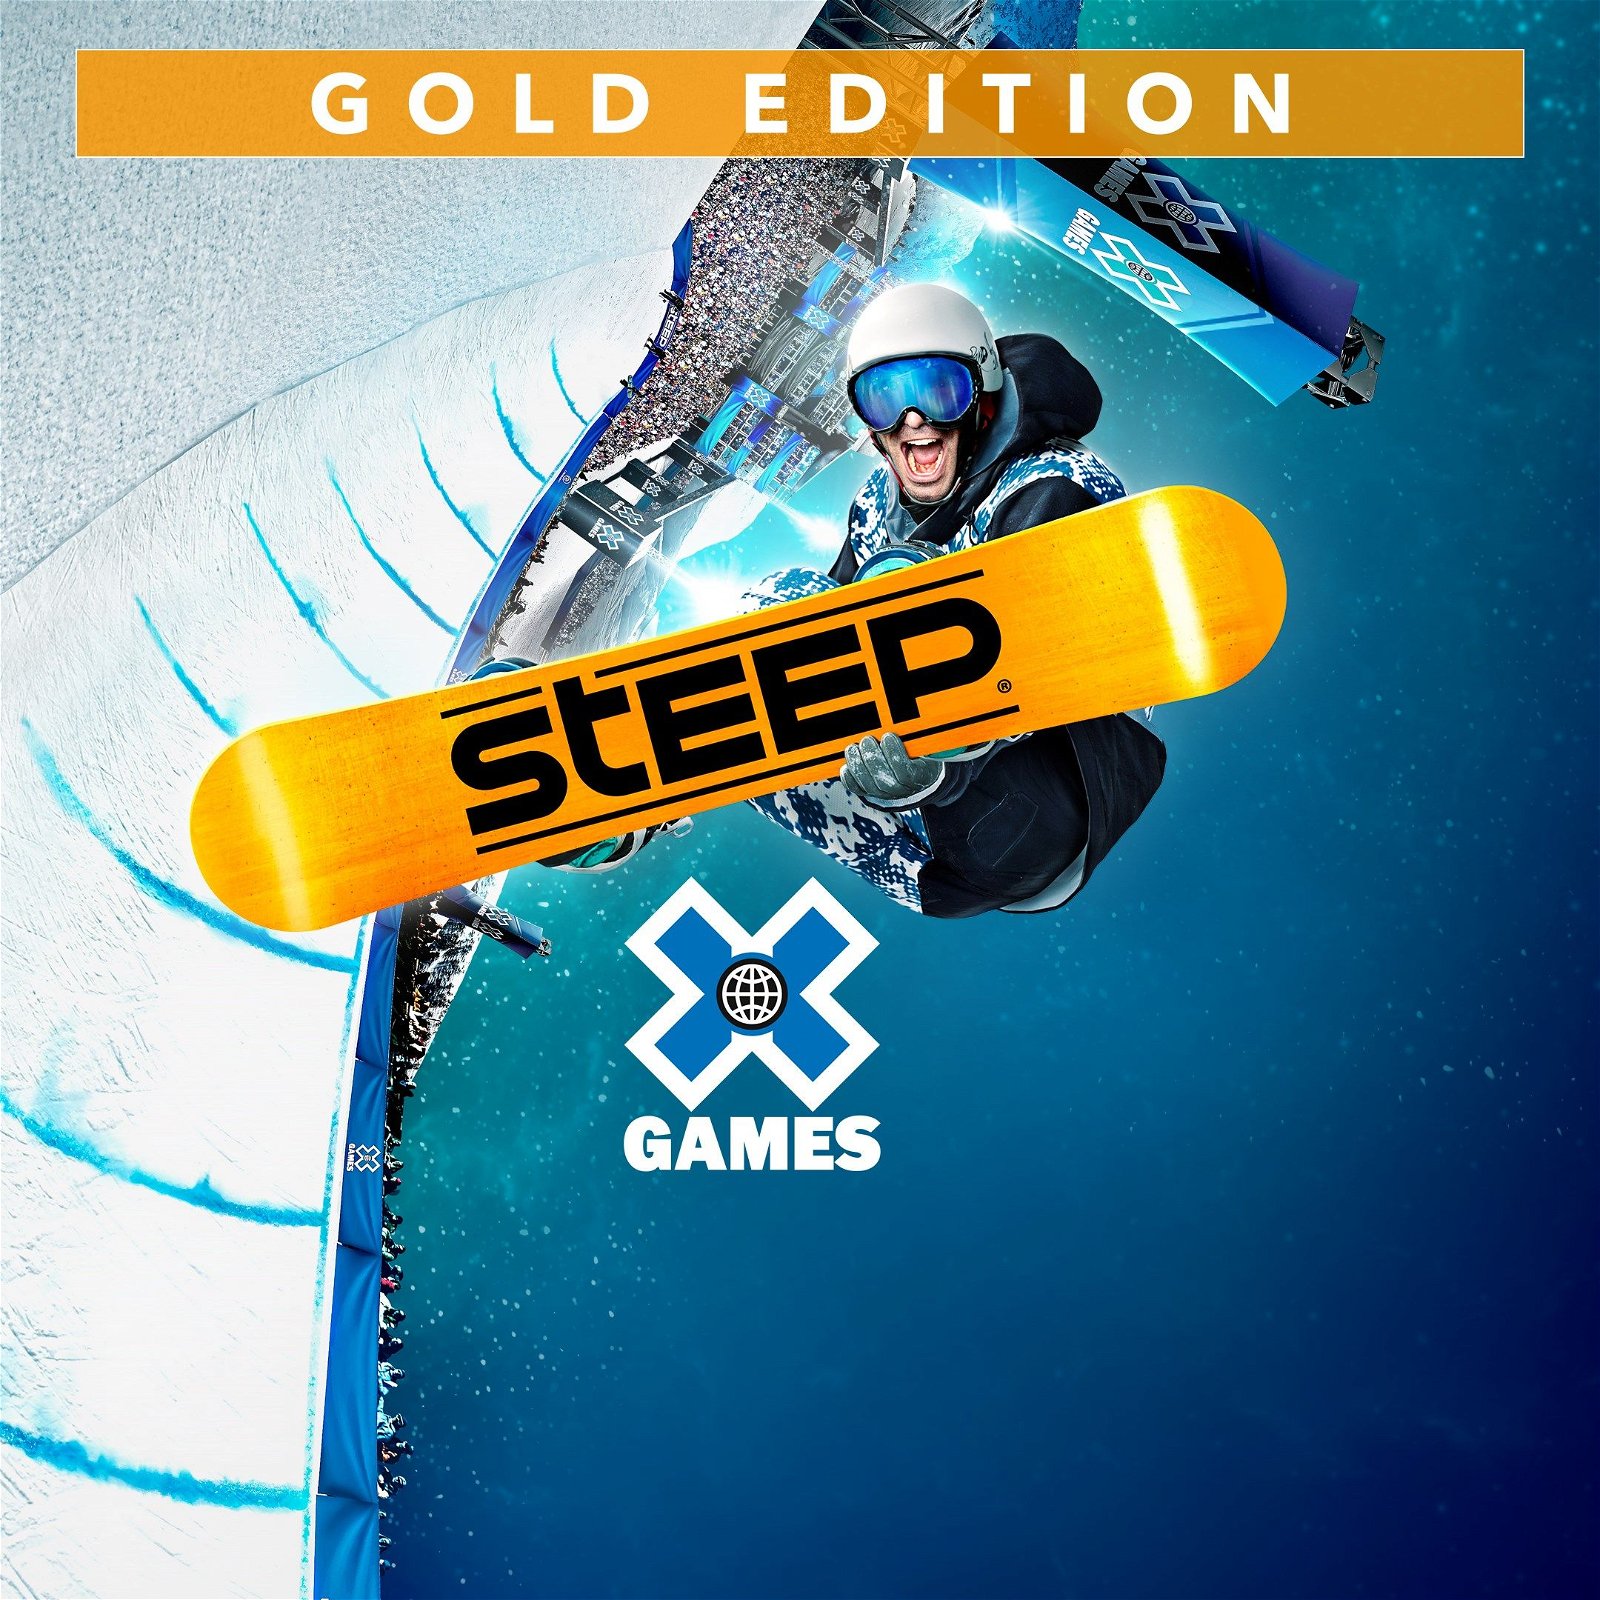 Image of Steep X Games Gold Edition